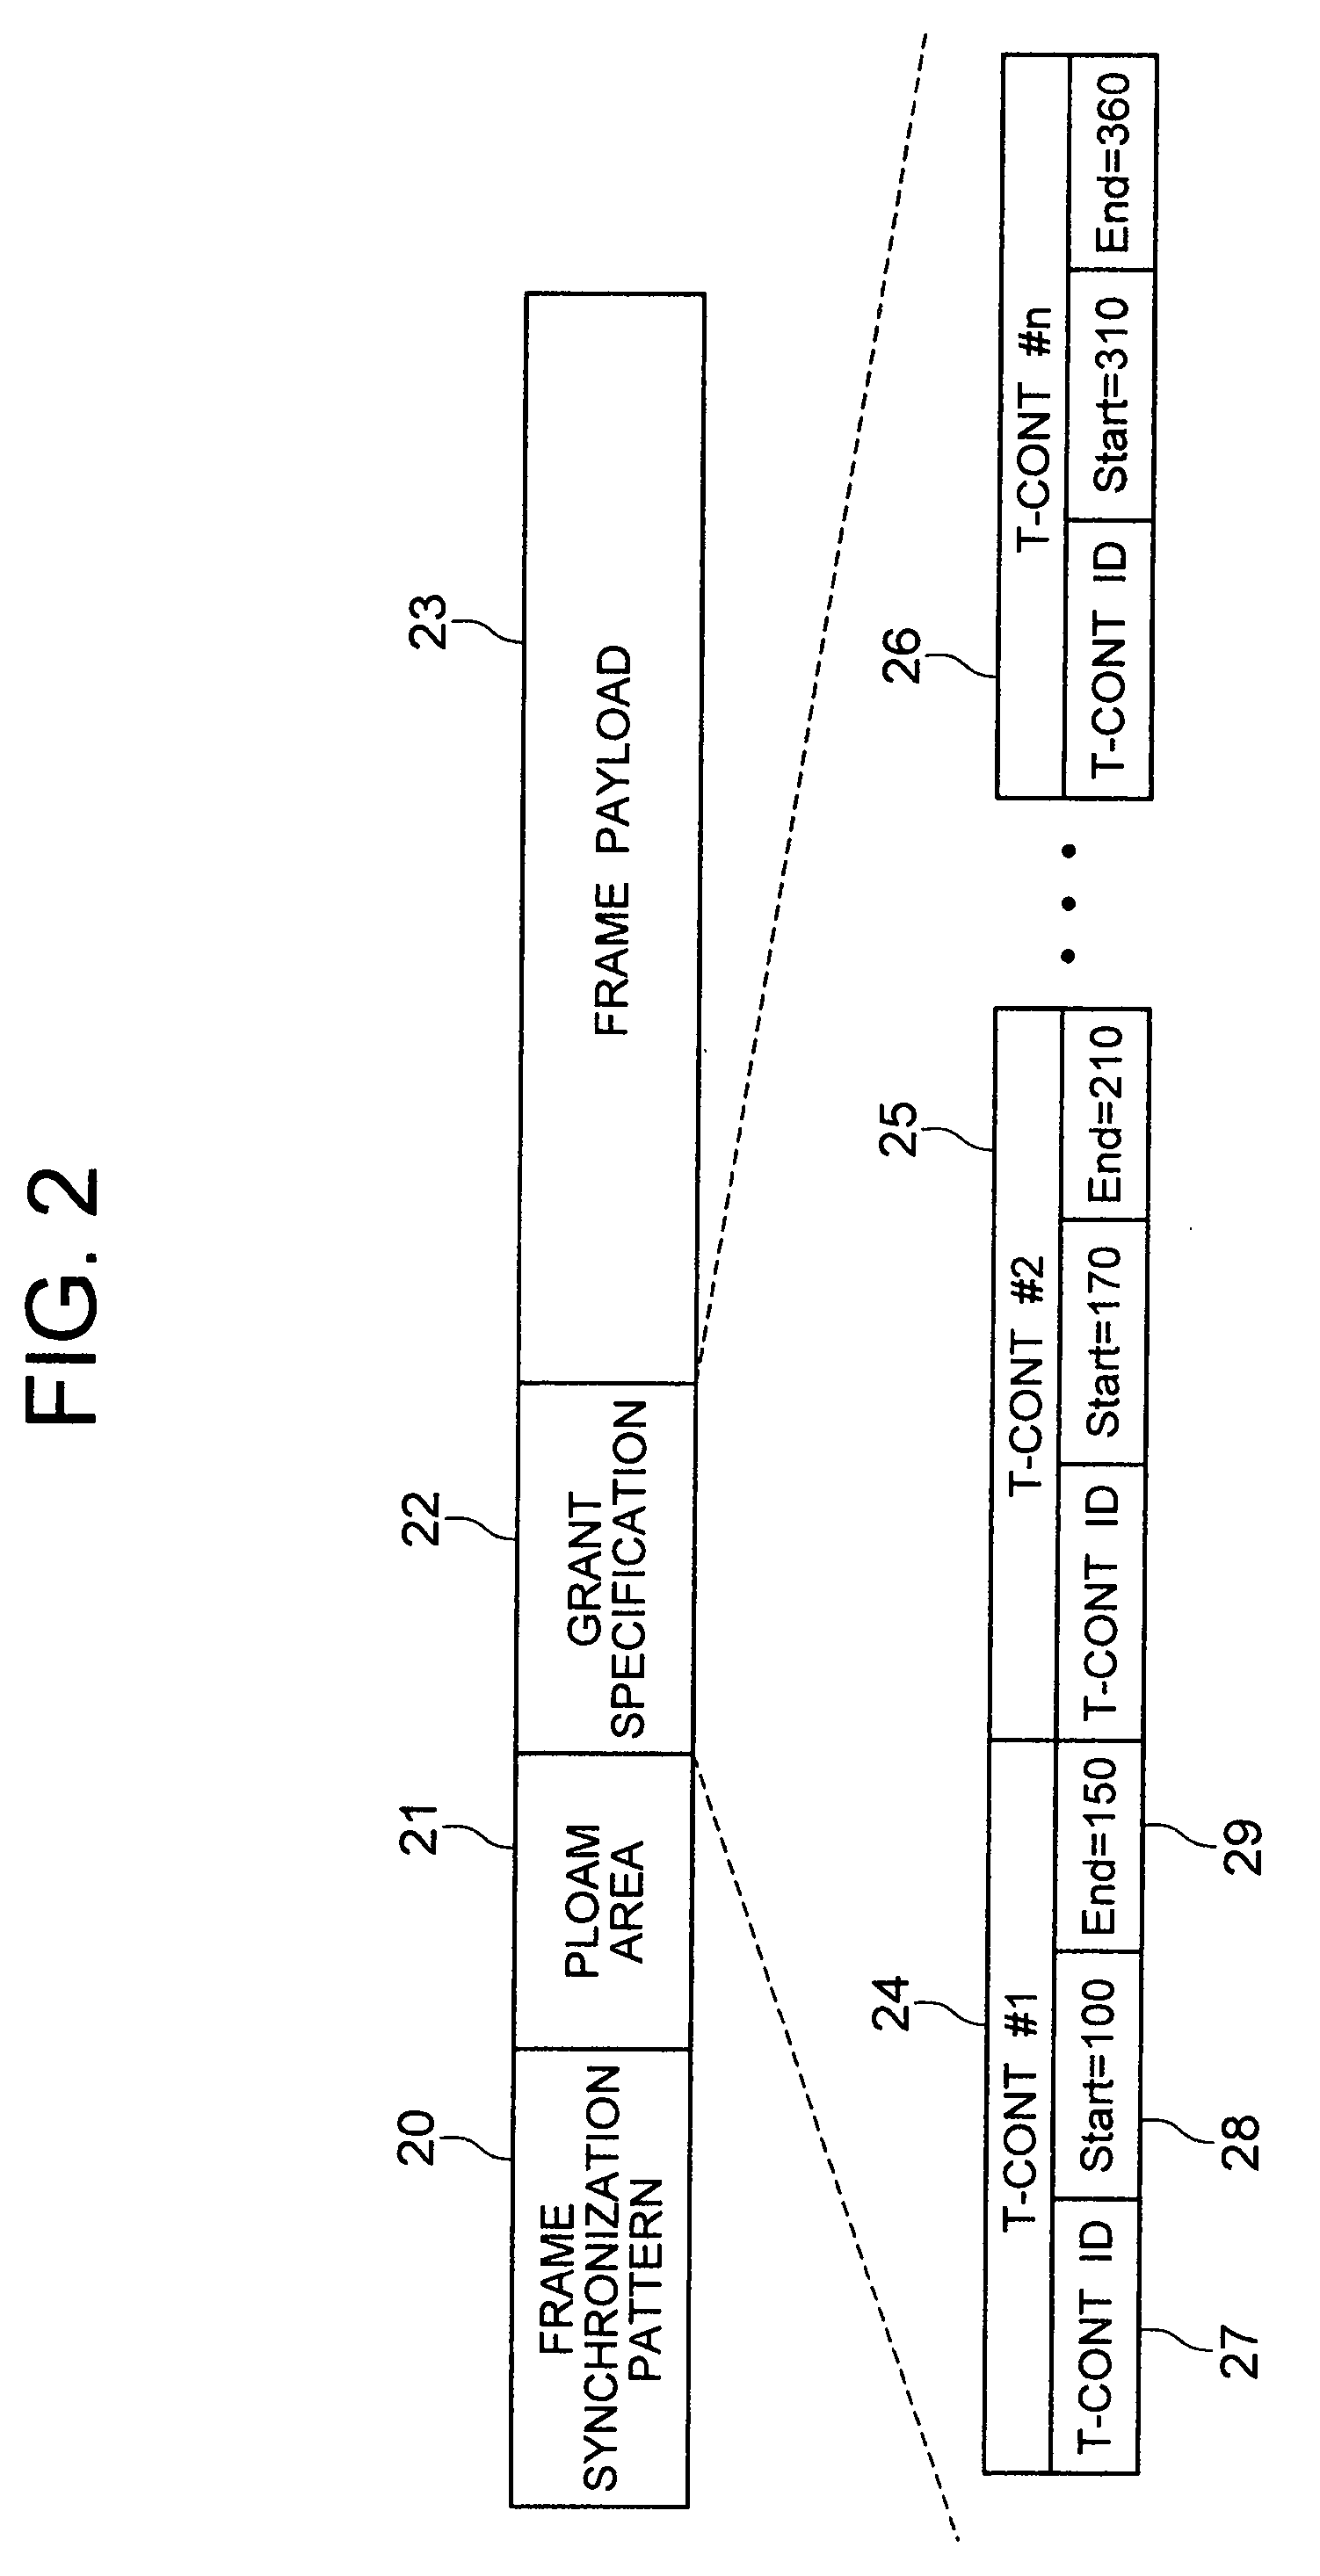 Optical line terminal capable of active bandwidth allocation for passive optical network system